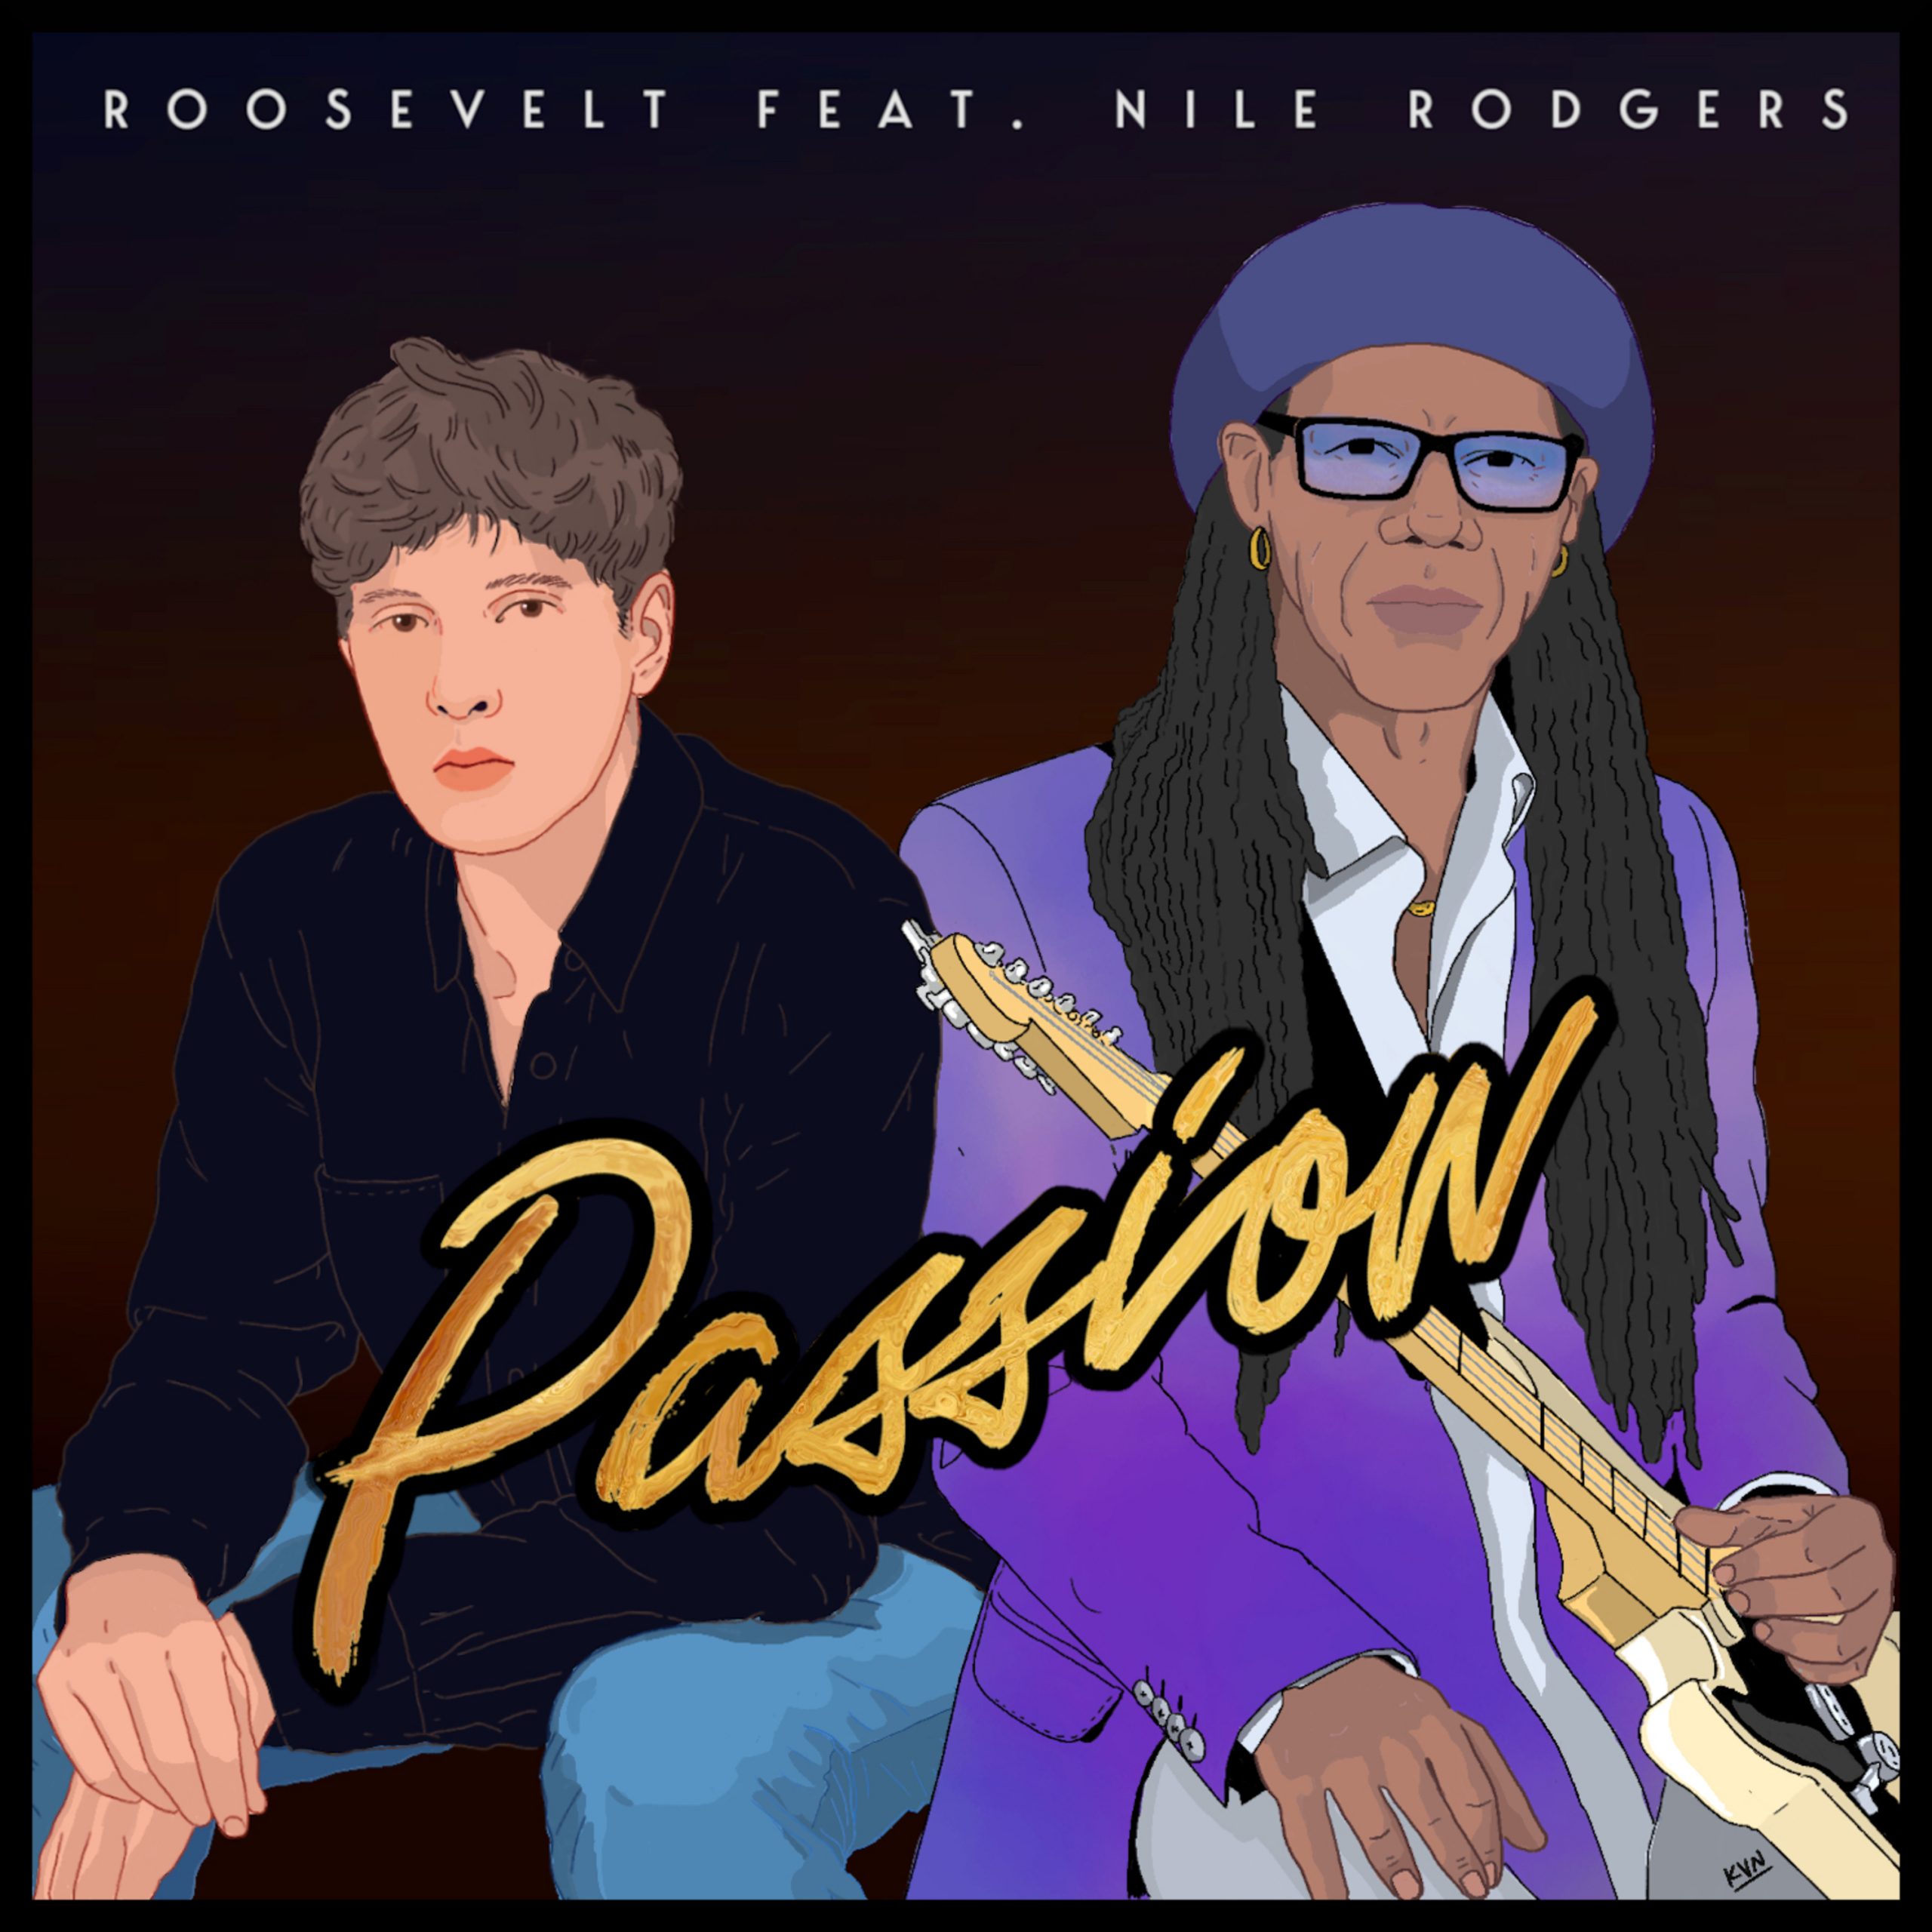 Roosevelt featuring Nile Rodgers — Passion cover artwork